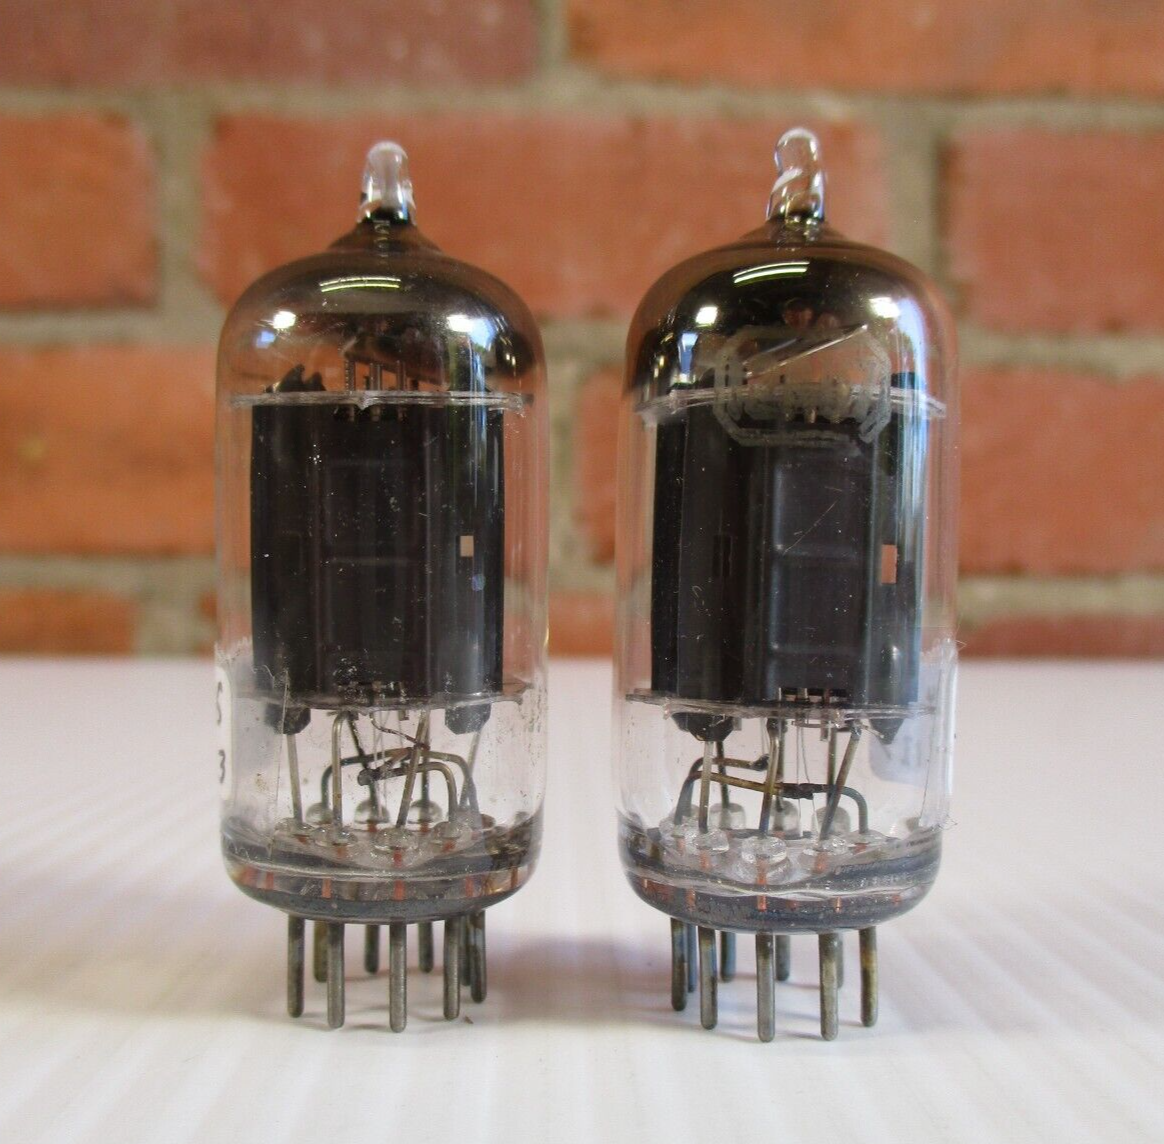 RCA 12AU7 ECC82 Vacuum Tubes Pair Gray Plate Angled Getters TV-7 Tested @ NOS - $39.50